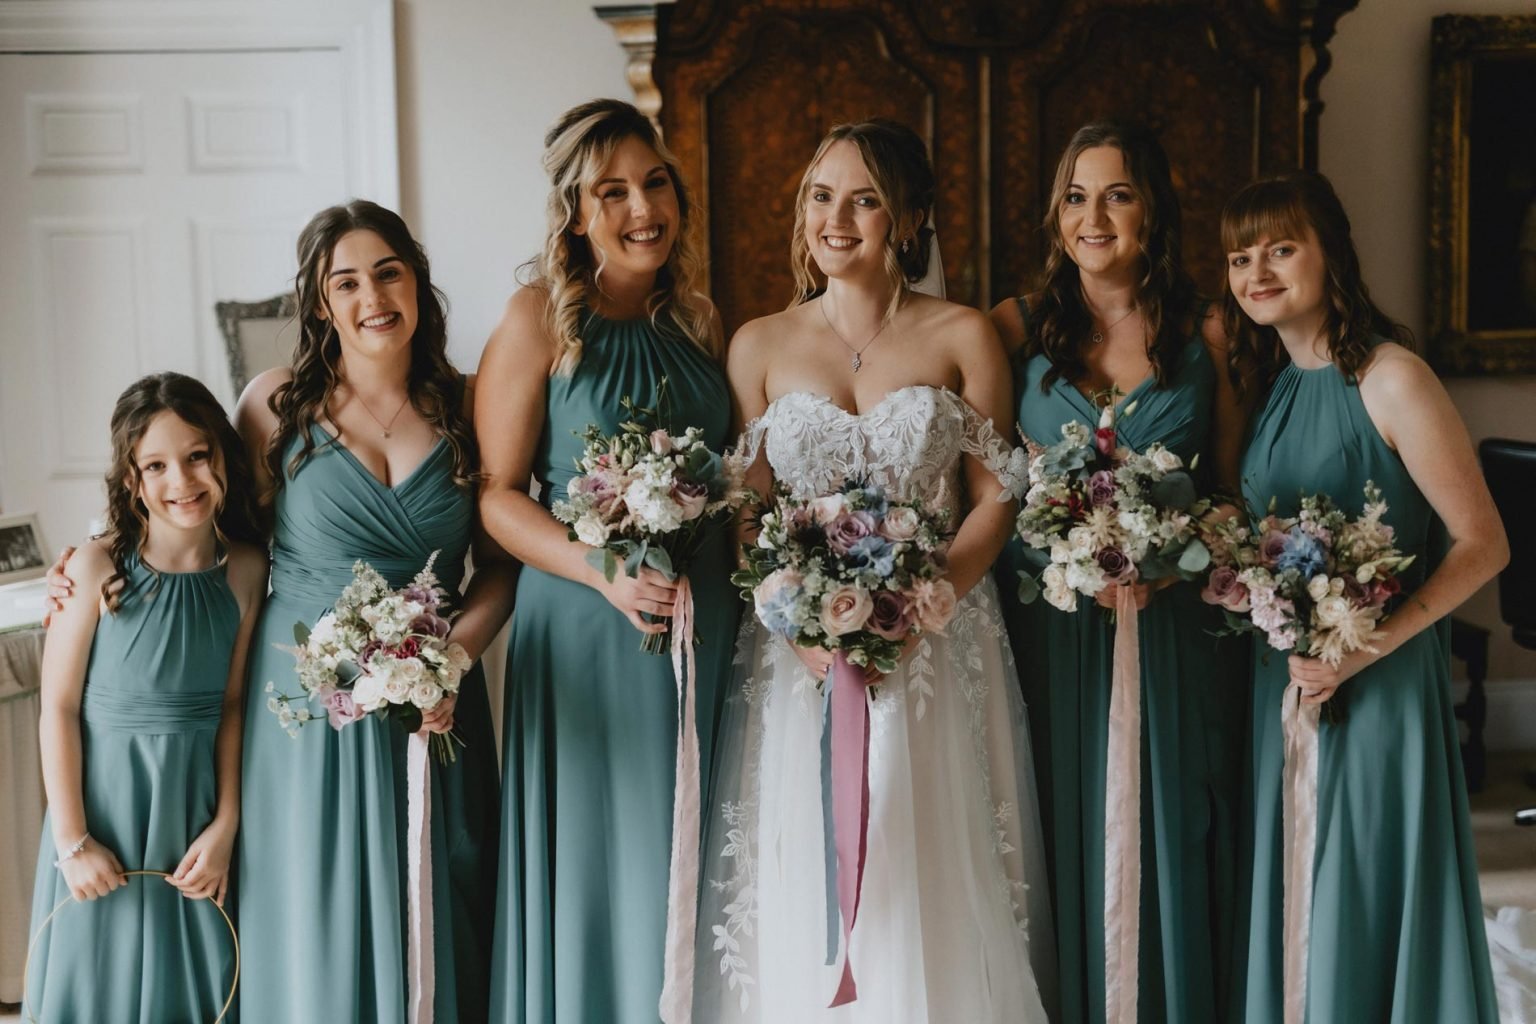  The bride is stood in the centre with her bridesmaids and flower girl either side wearing different styled long sleeveless sage bridesmaid dresses. The bride is wearing a long, strapless, white wedding dress with applique lace detailing across the b